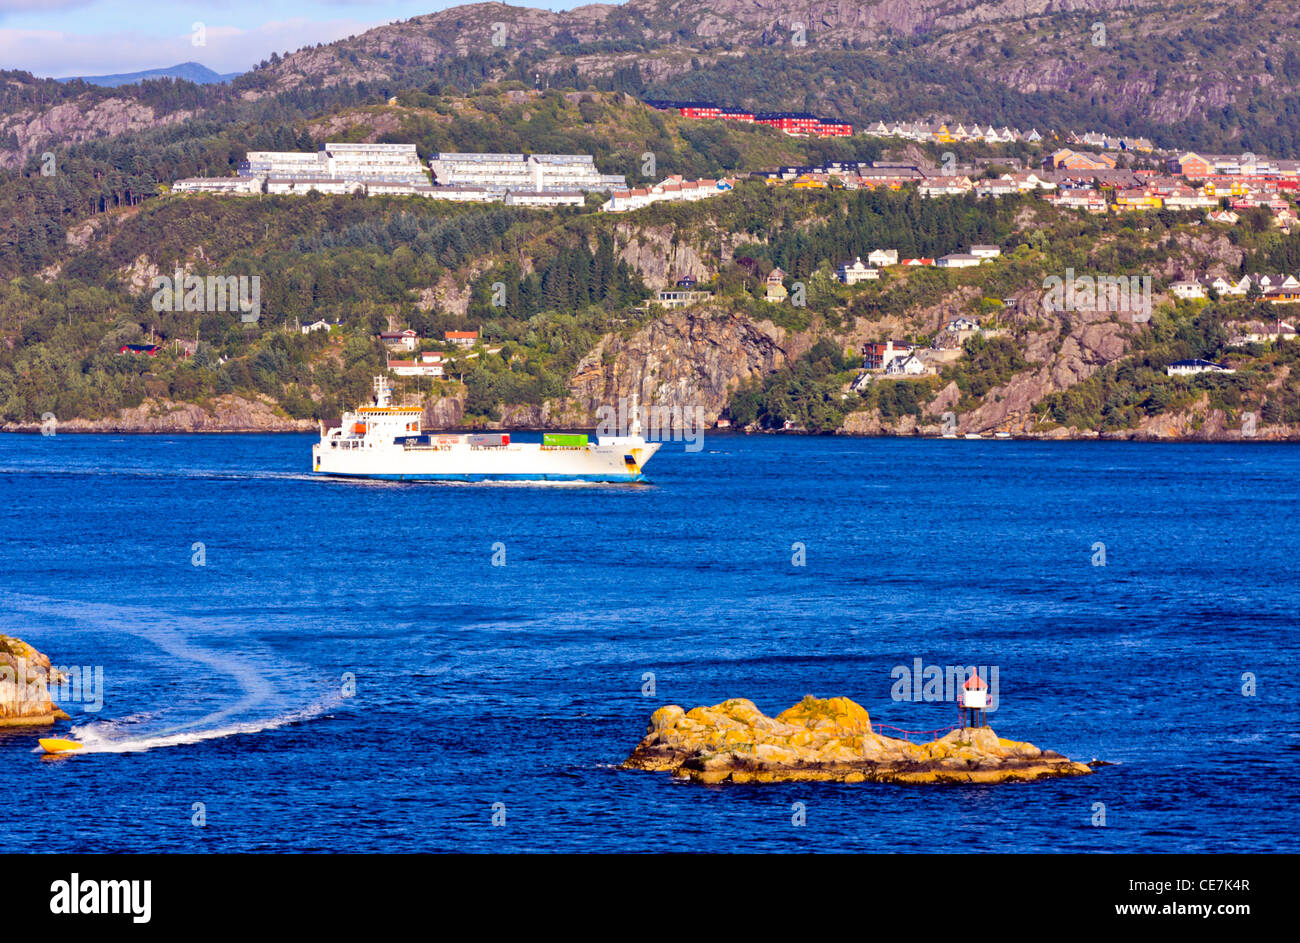 Ship traffic in the Bergen Fjord, Norway Stock Photo